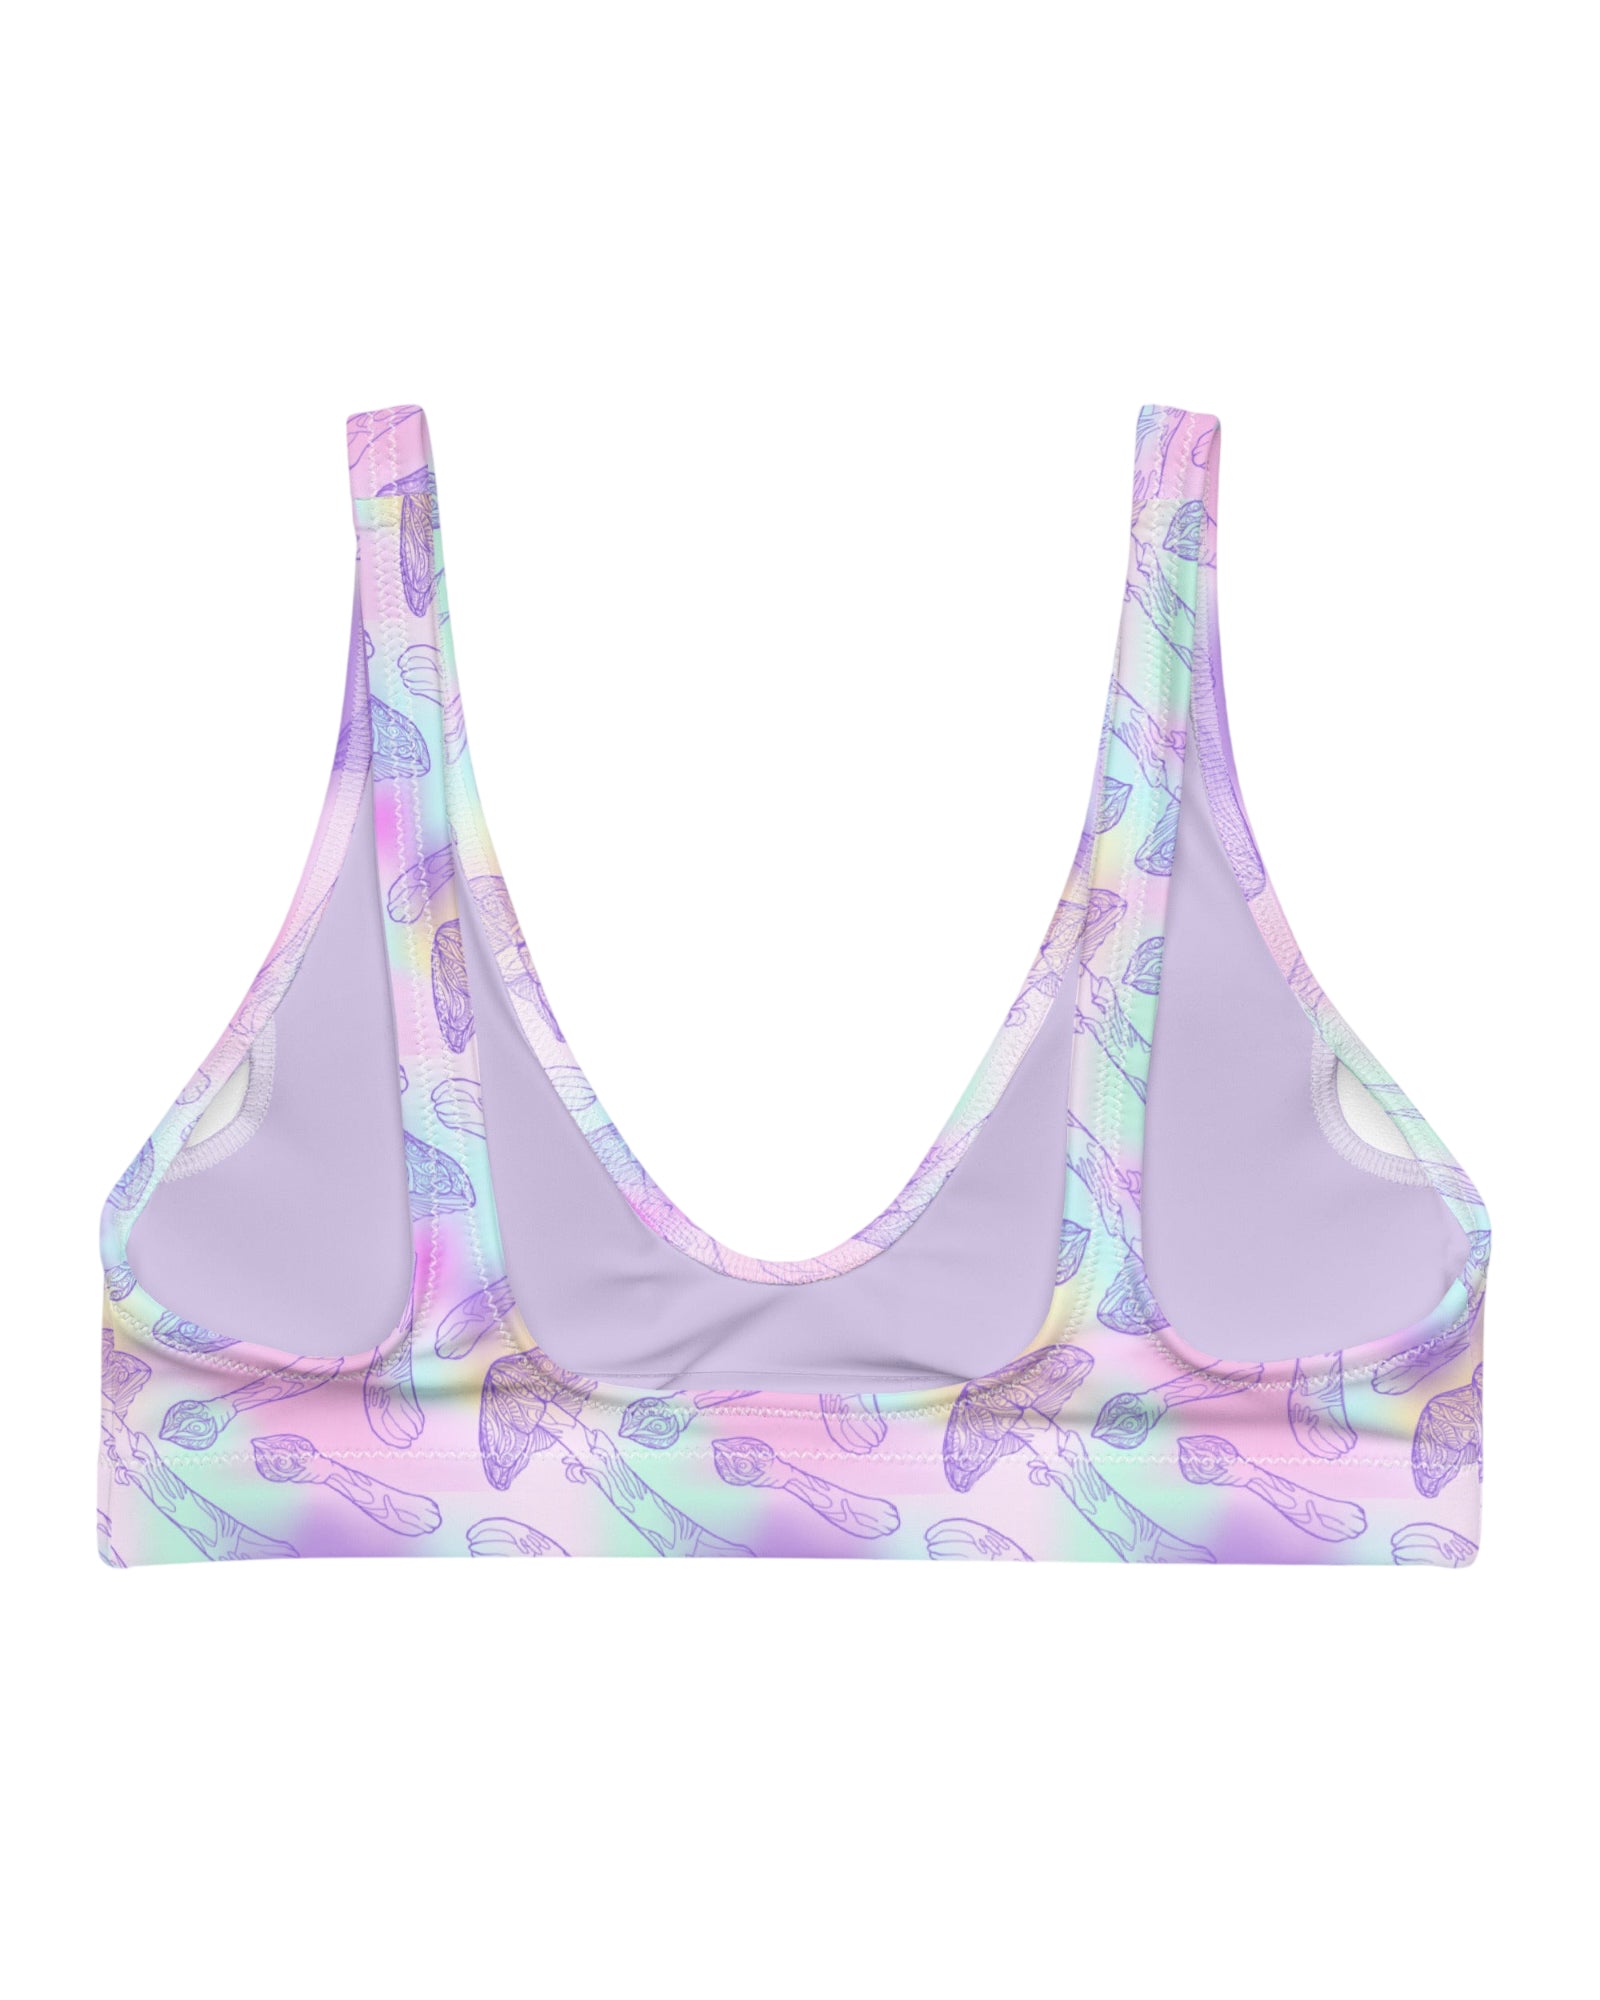 Mad Catter Bra Top